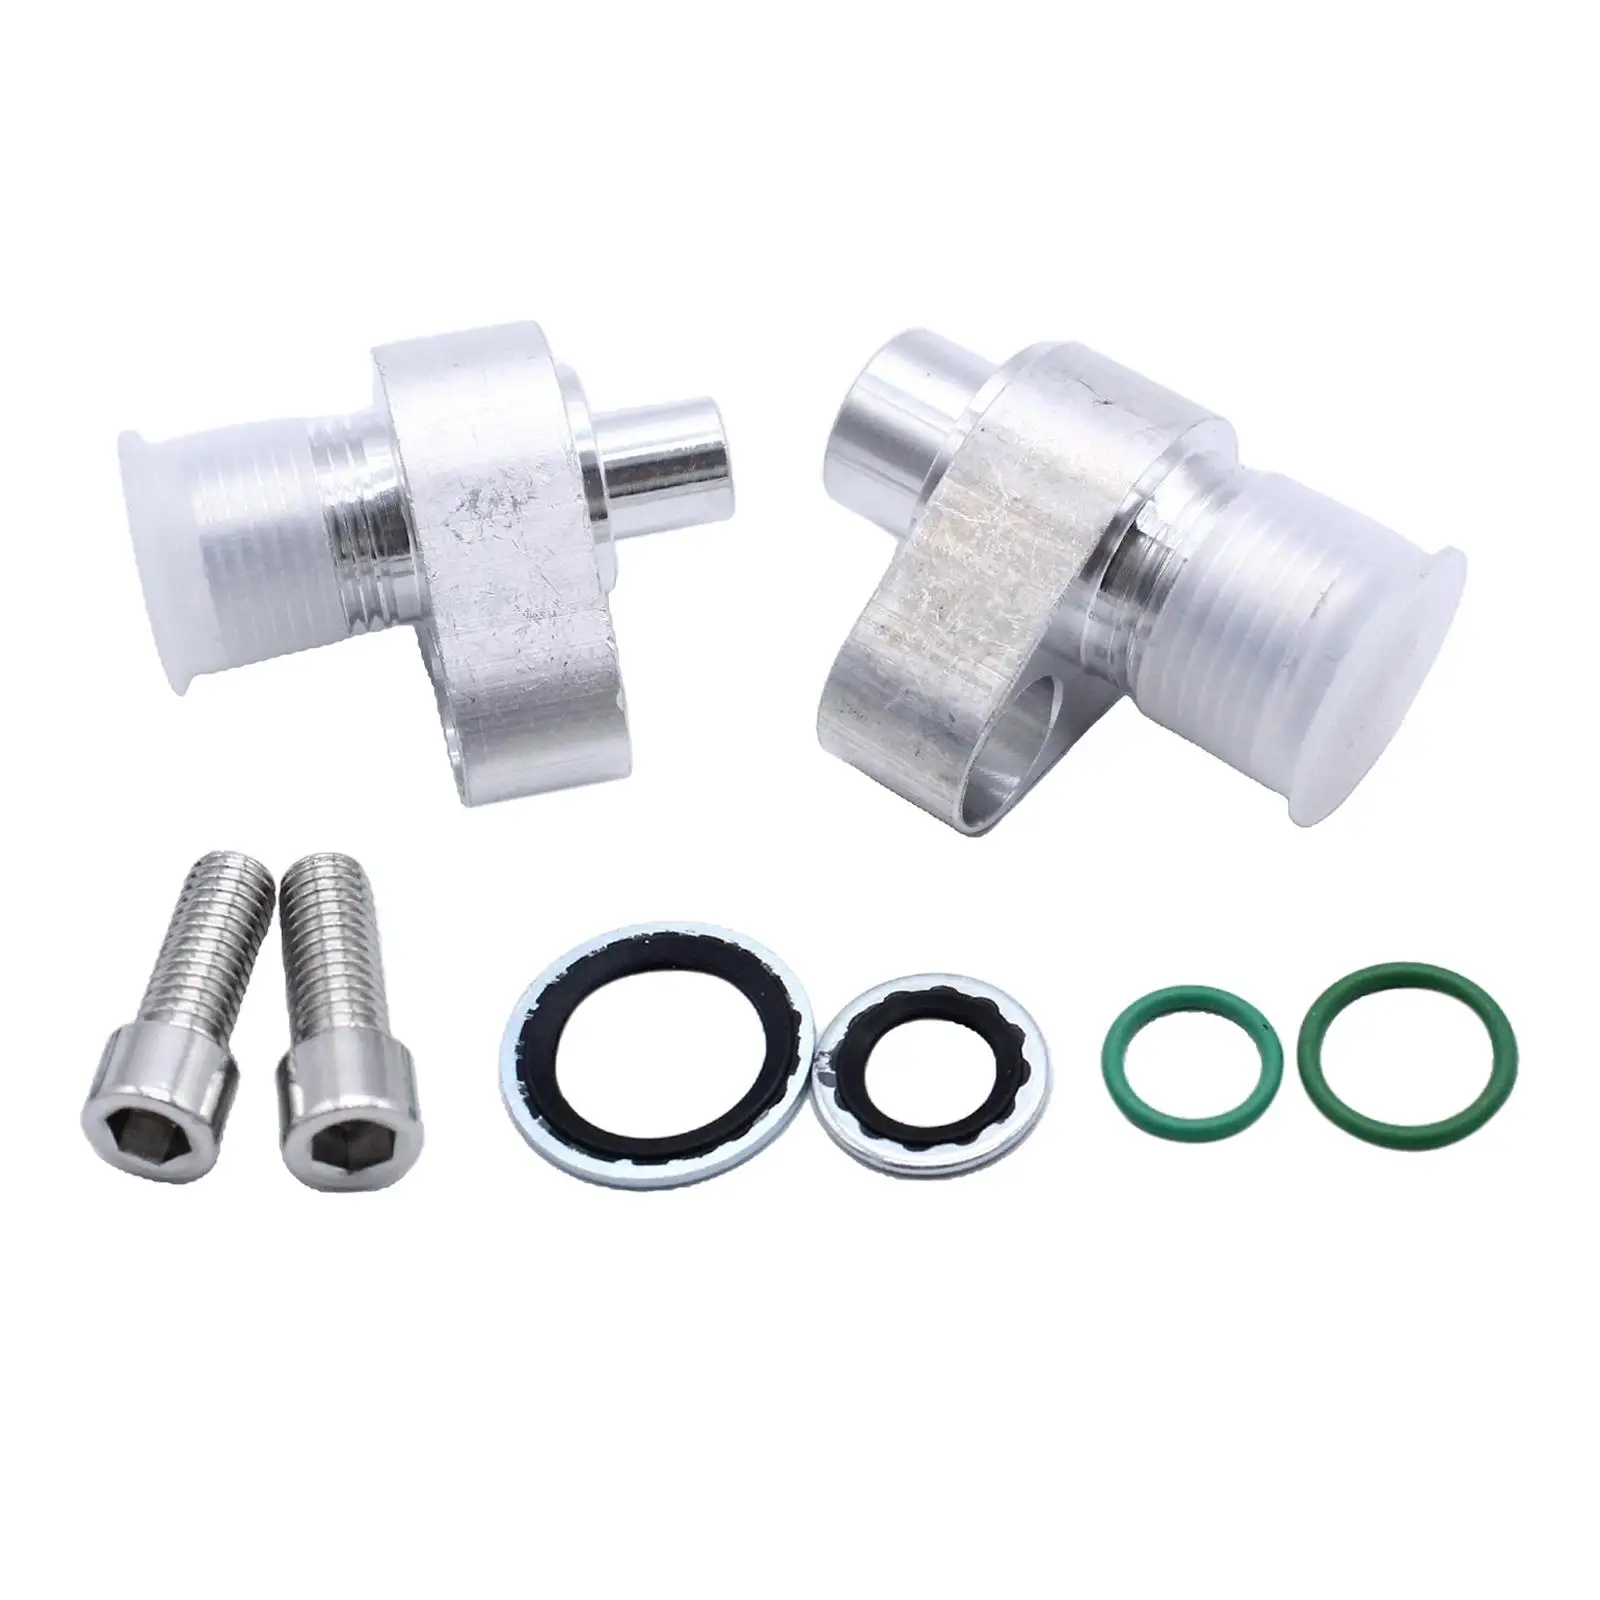 451-1105 440-823 451-1106 DS345061 Parts  cessories W10SA   Compressor Connector Adapter Fittings for Denso 10S20F 10S17F